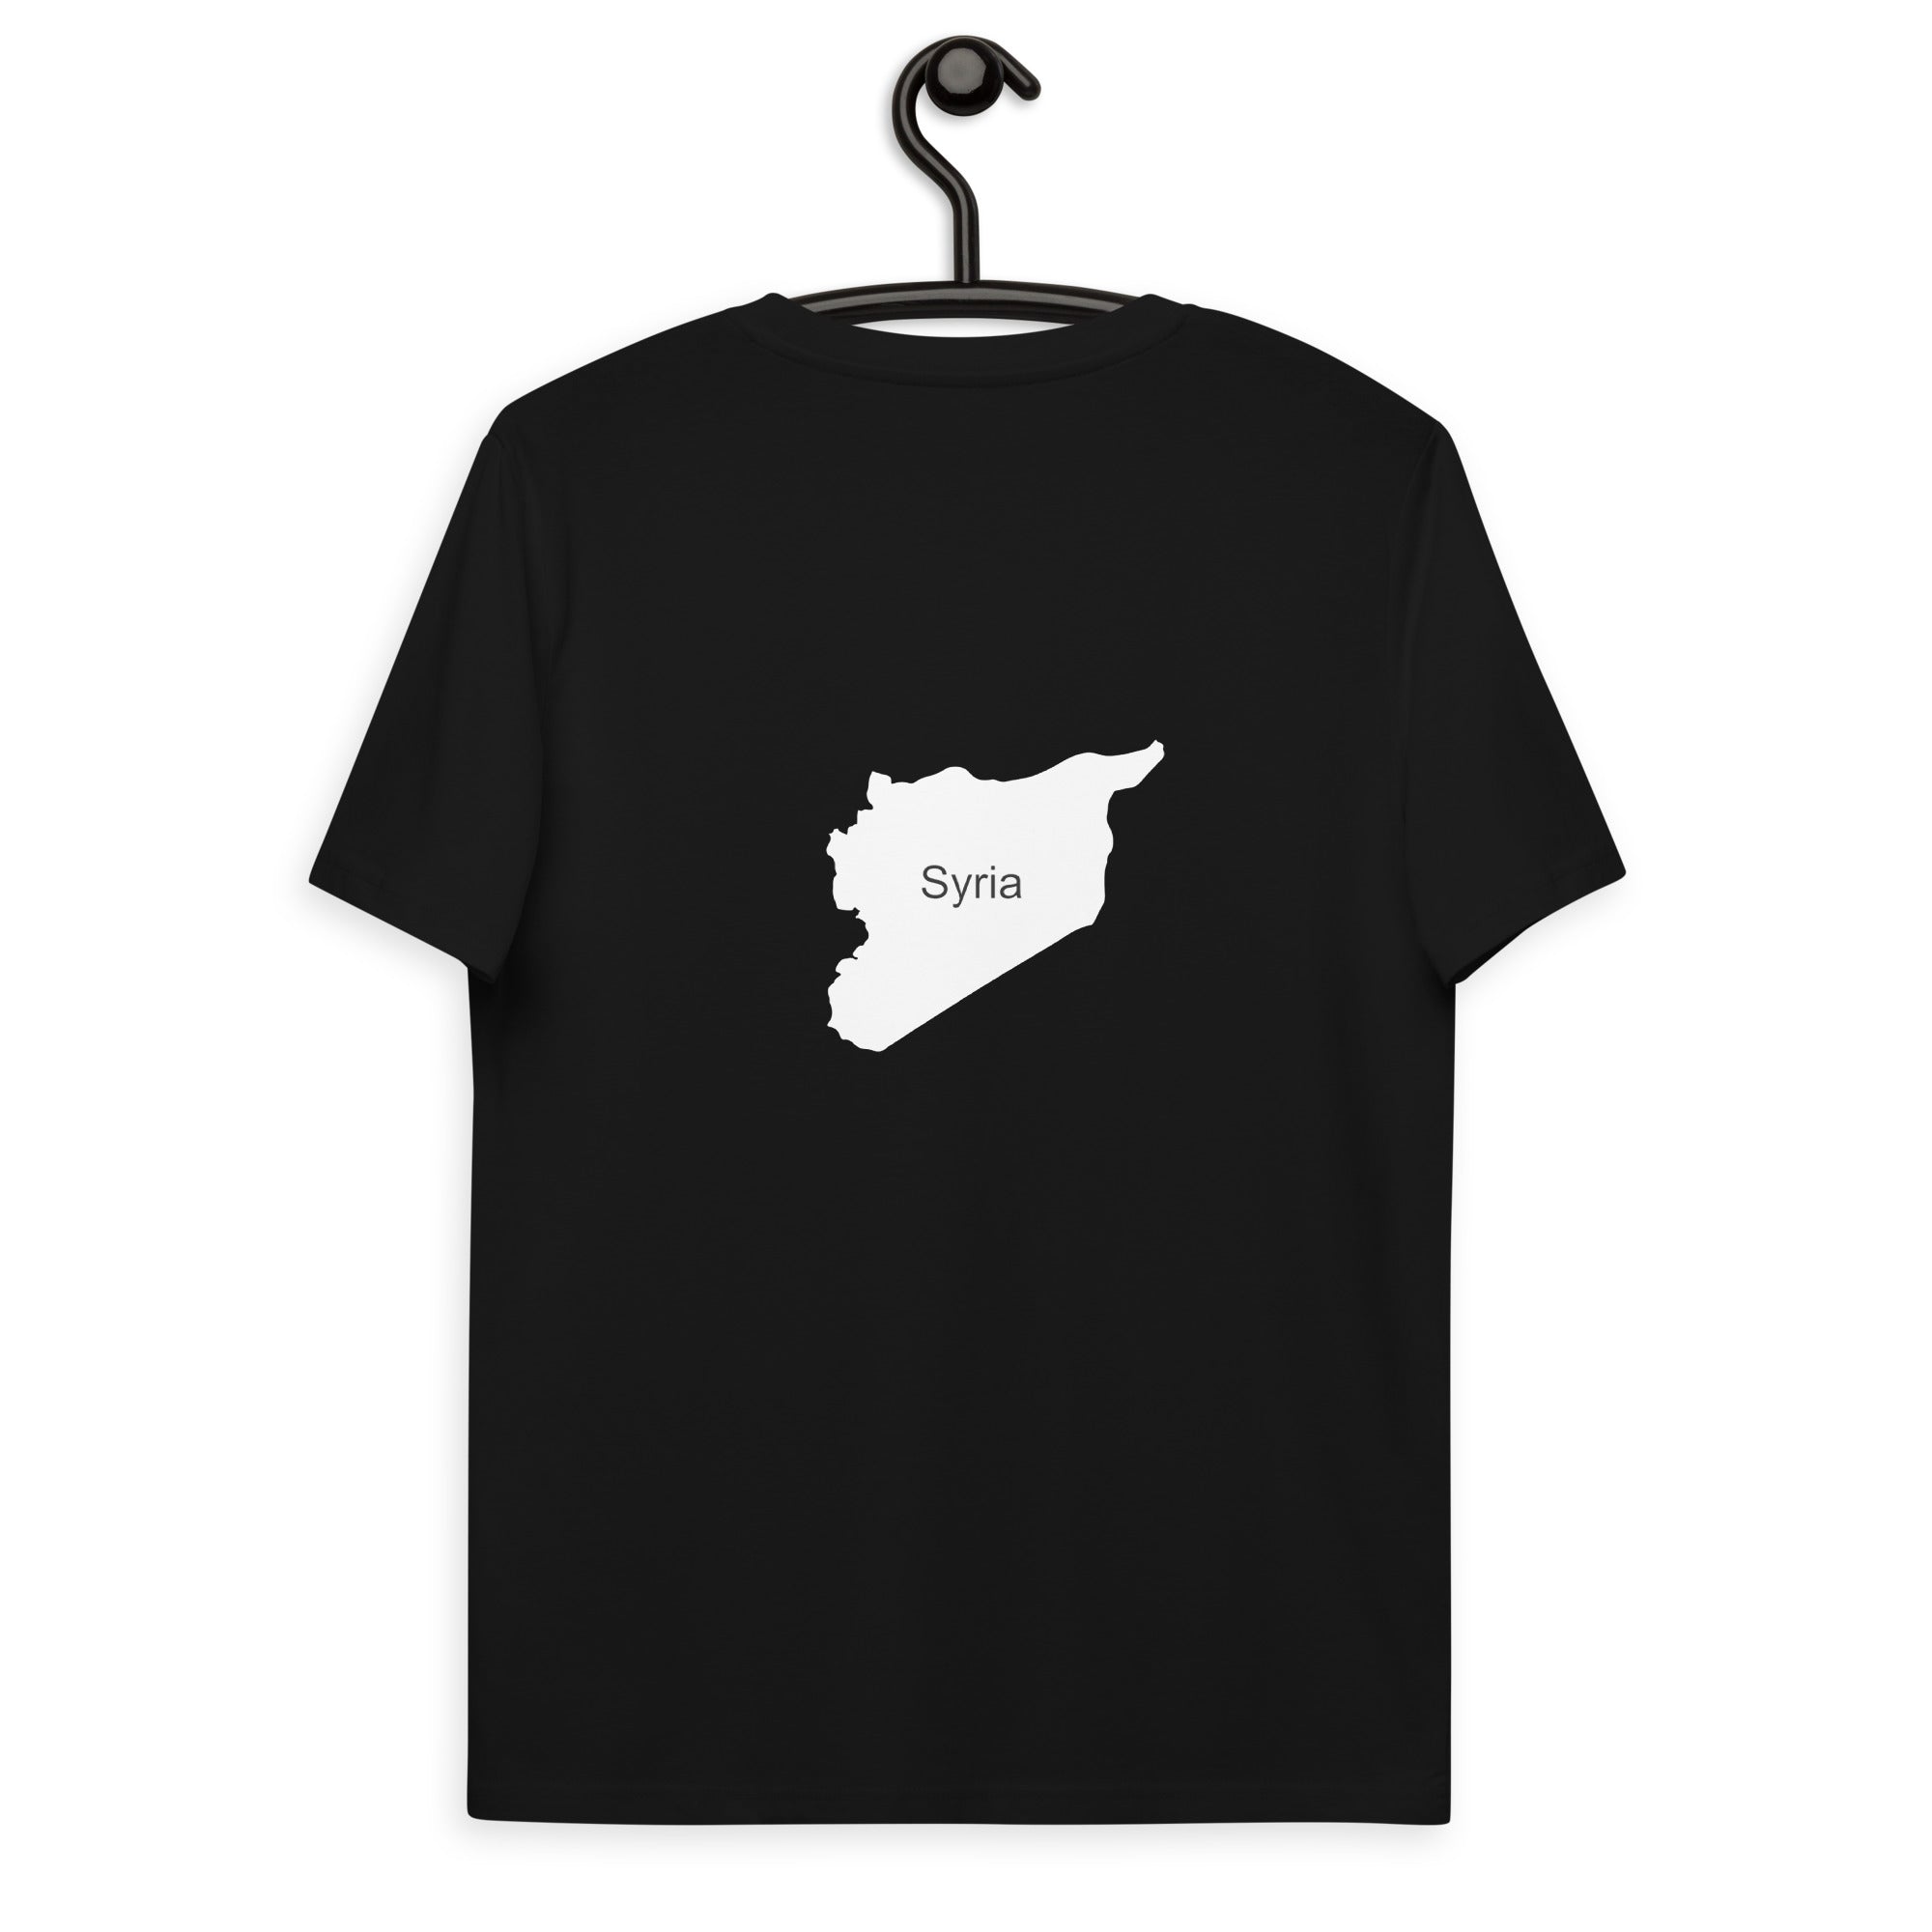 No substitute for Syria - t-shirt